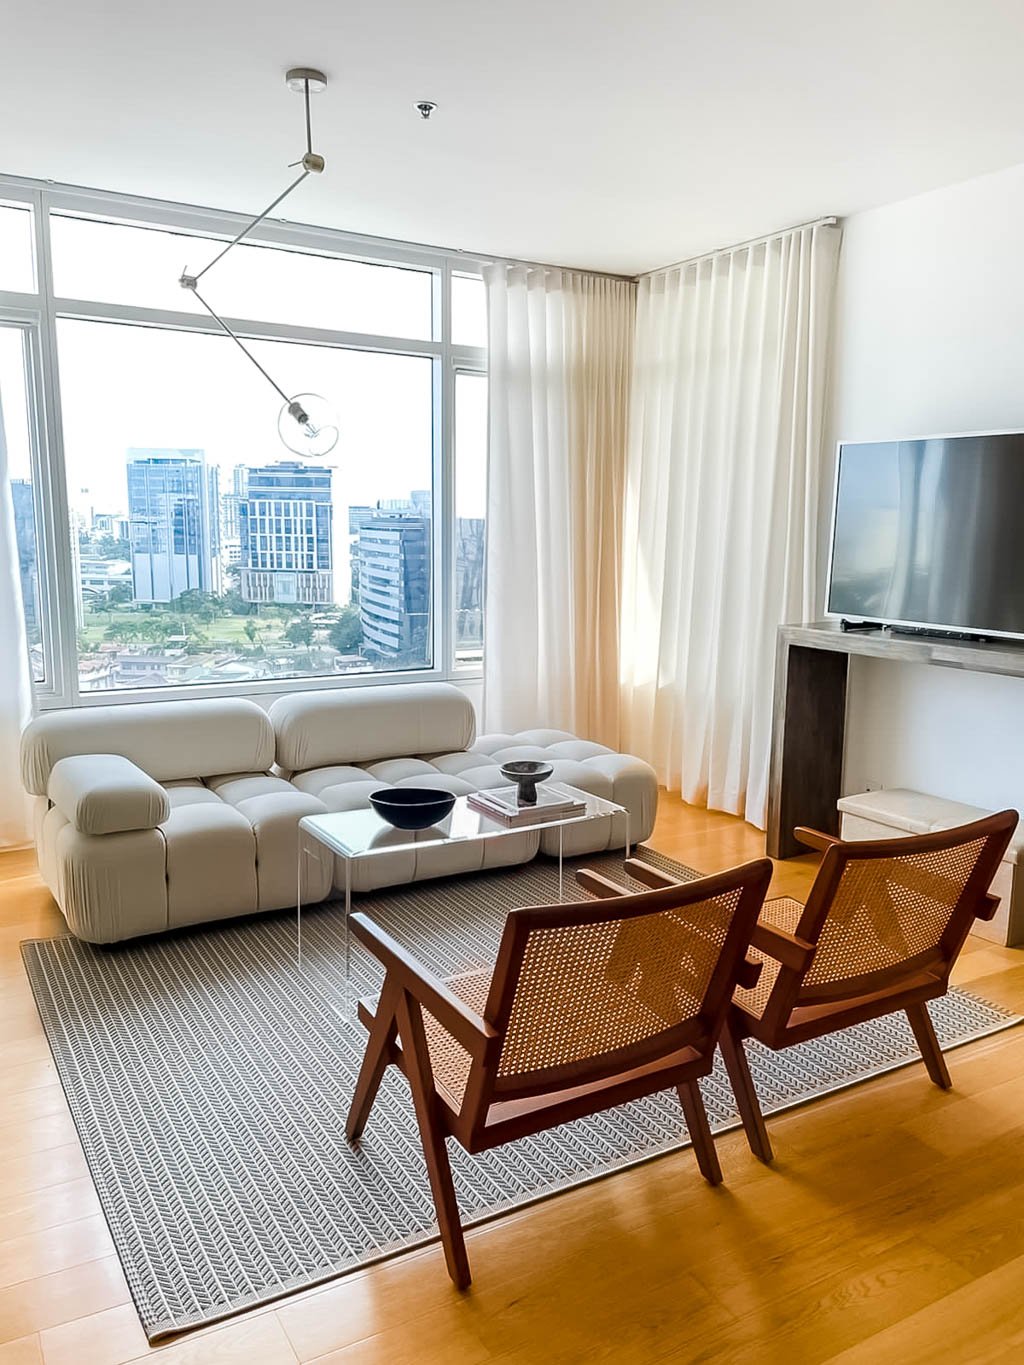 RCTS21 Furnished 2 Bedroom Condo for Rent in 1016 Residences - 3